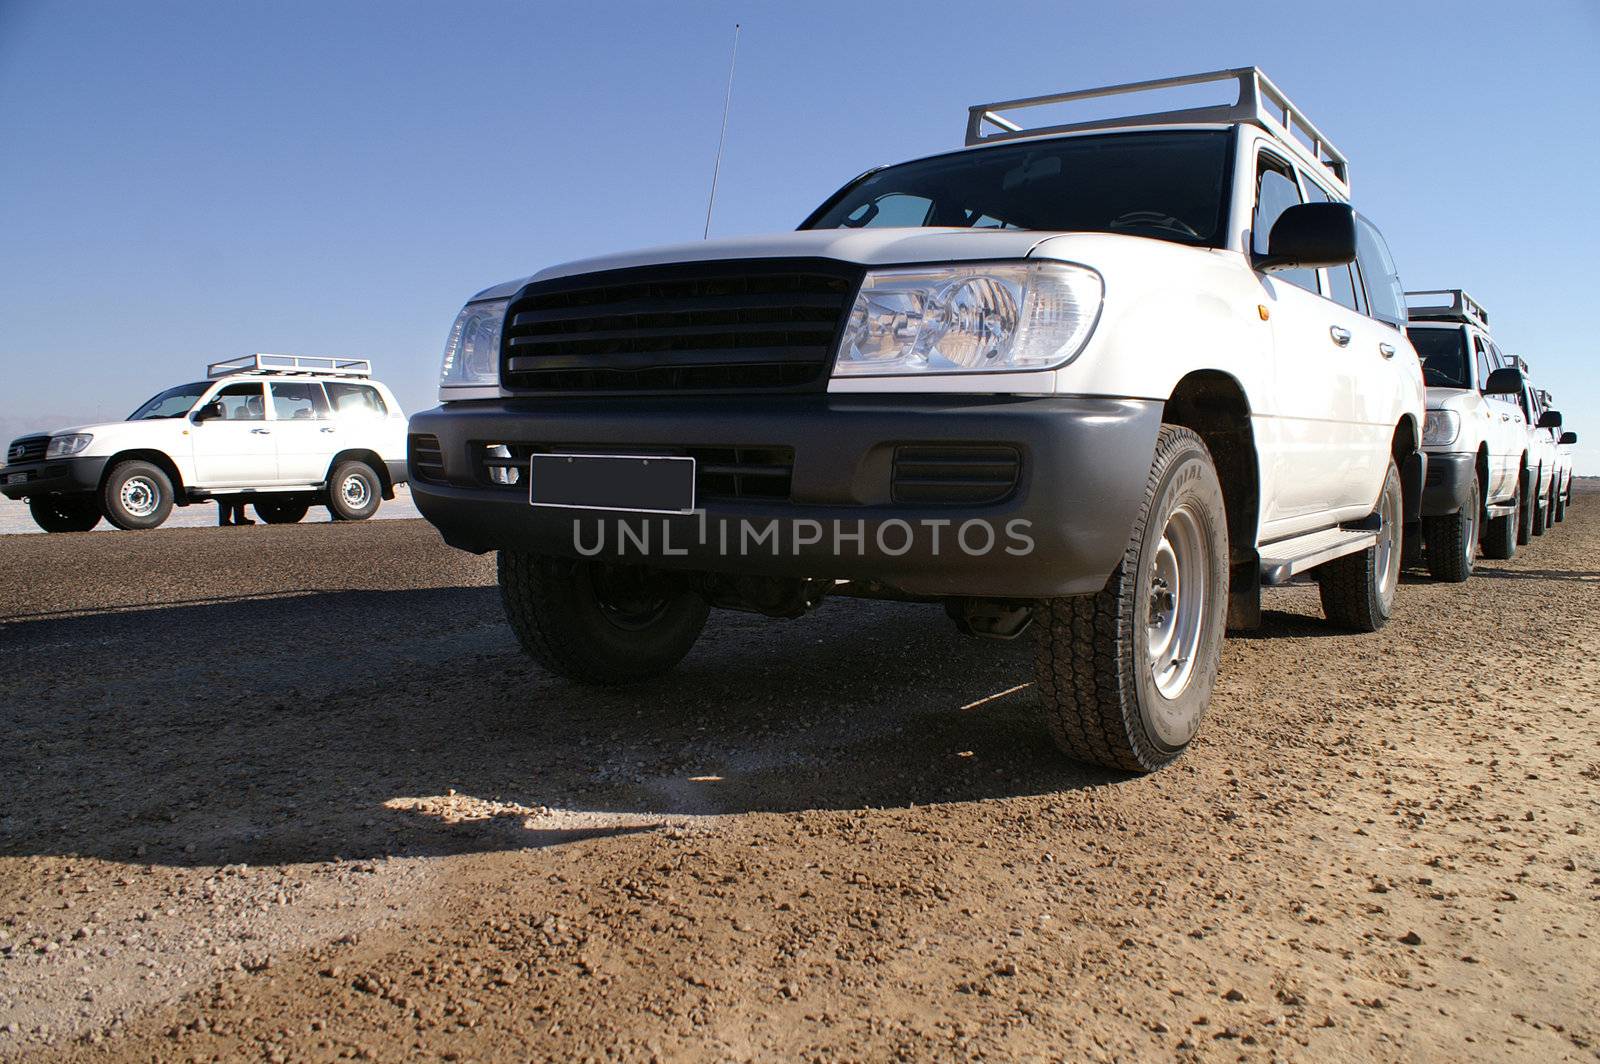 Offroad in the desert by photochecker